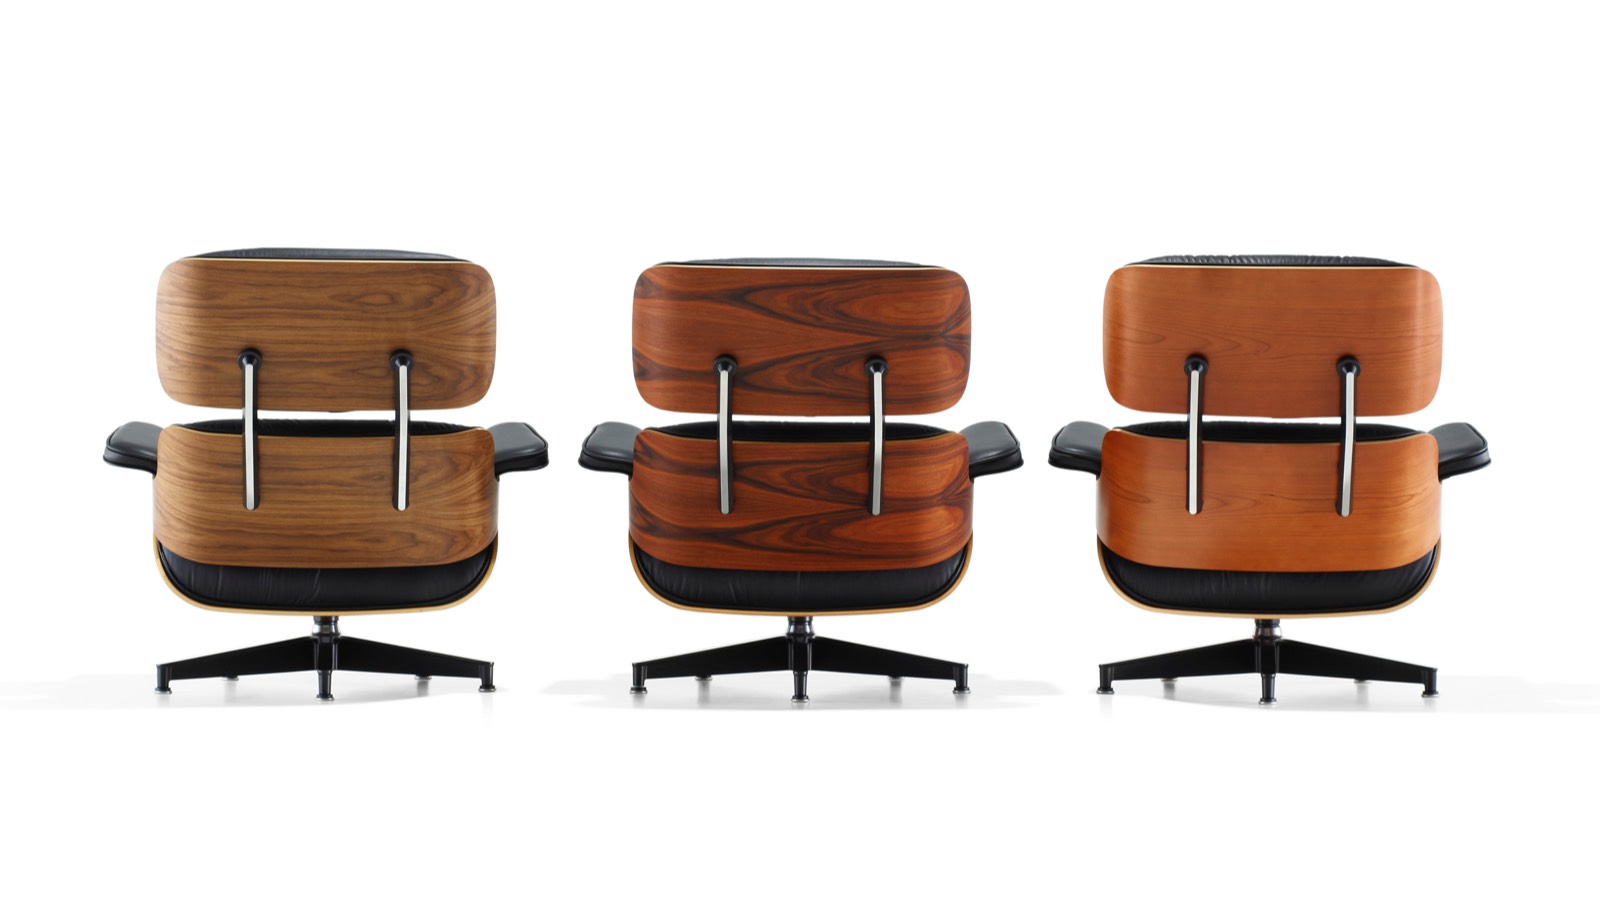 Three Eames Lounge Chairs, each with a different wood veneer finish, viewed from the rear. 